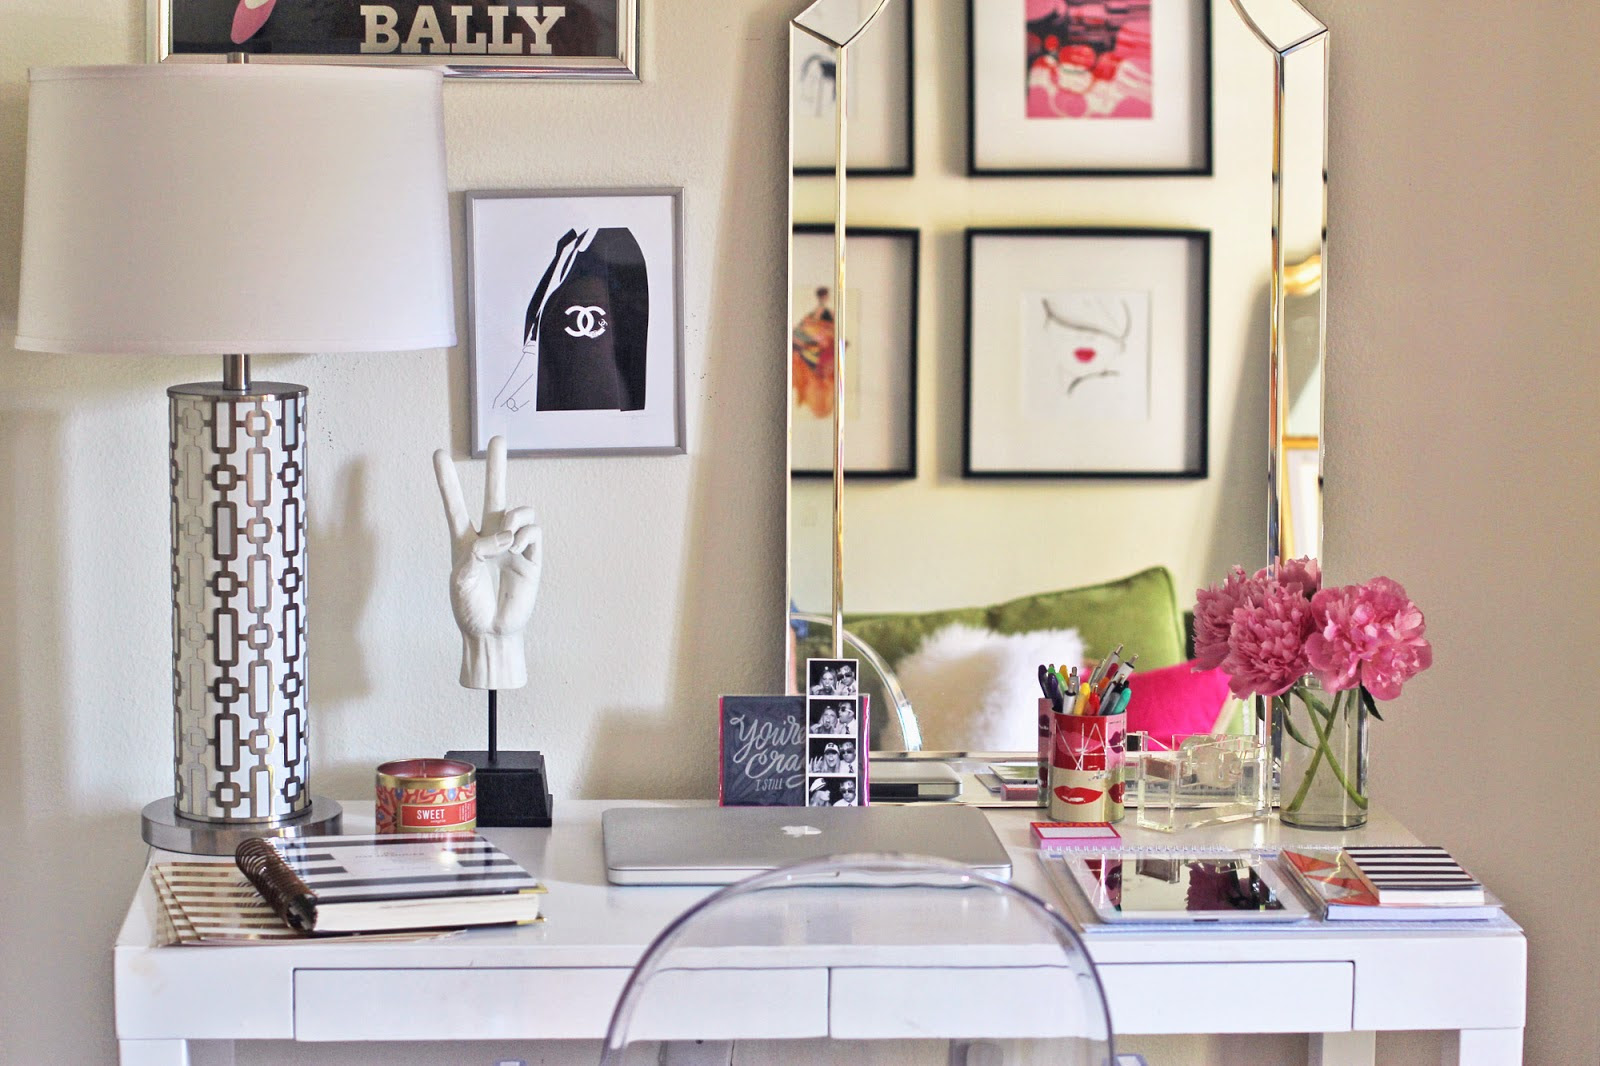 Give your desk a makeover with these 7 cute ideas